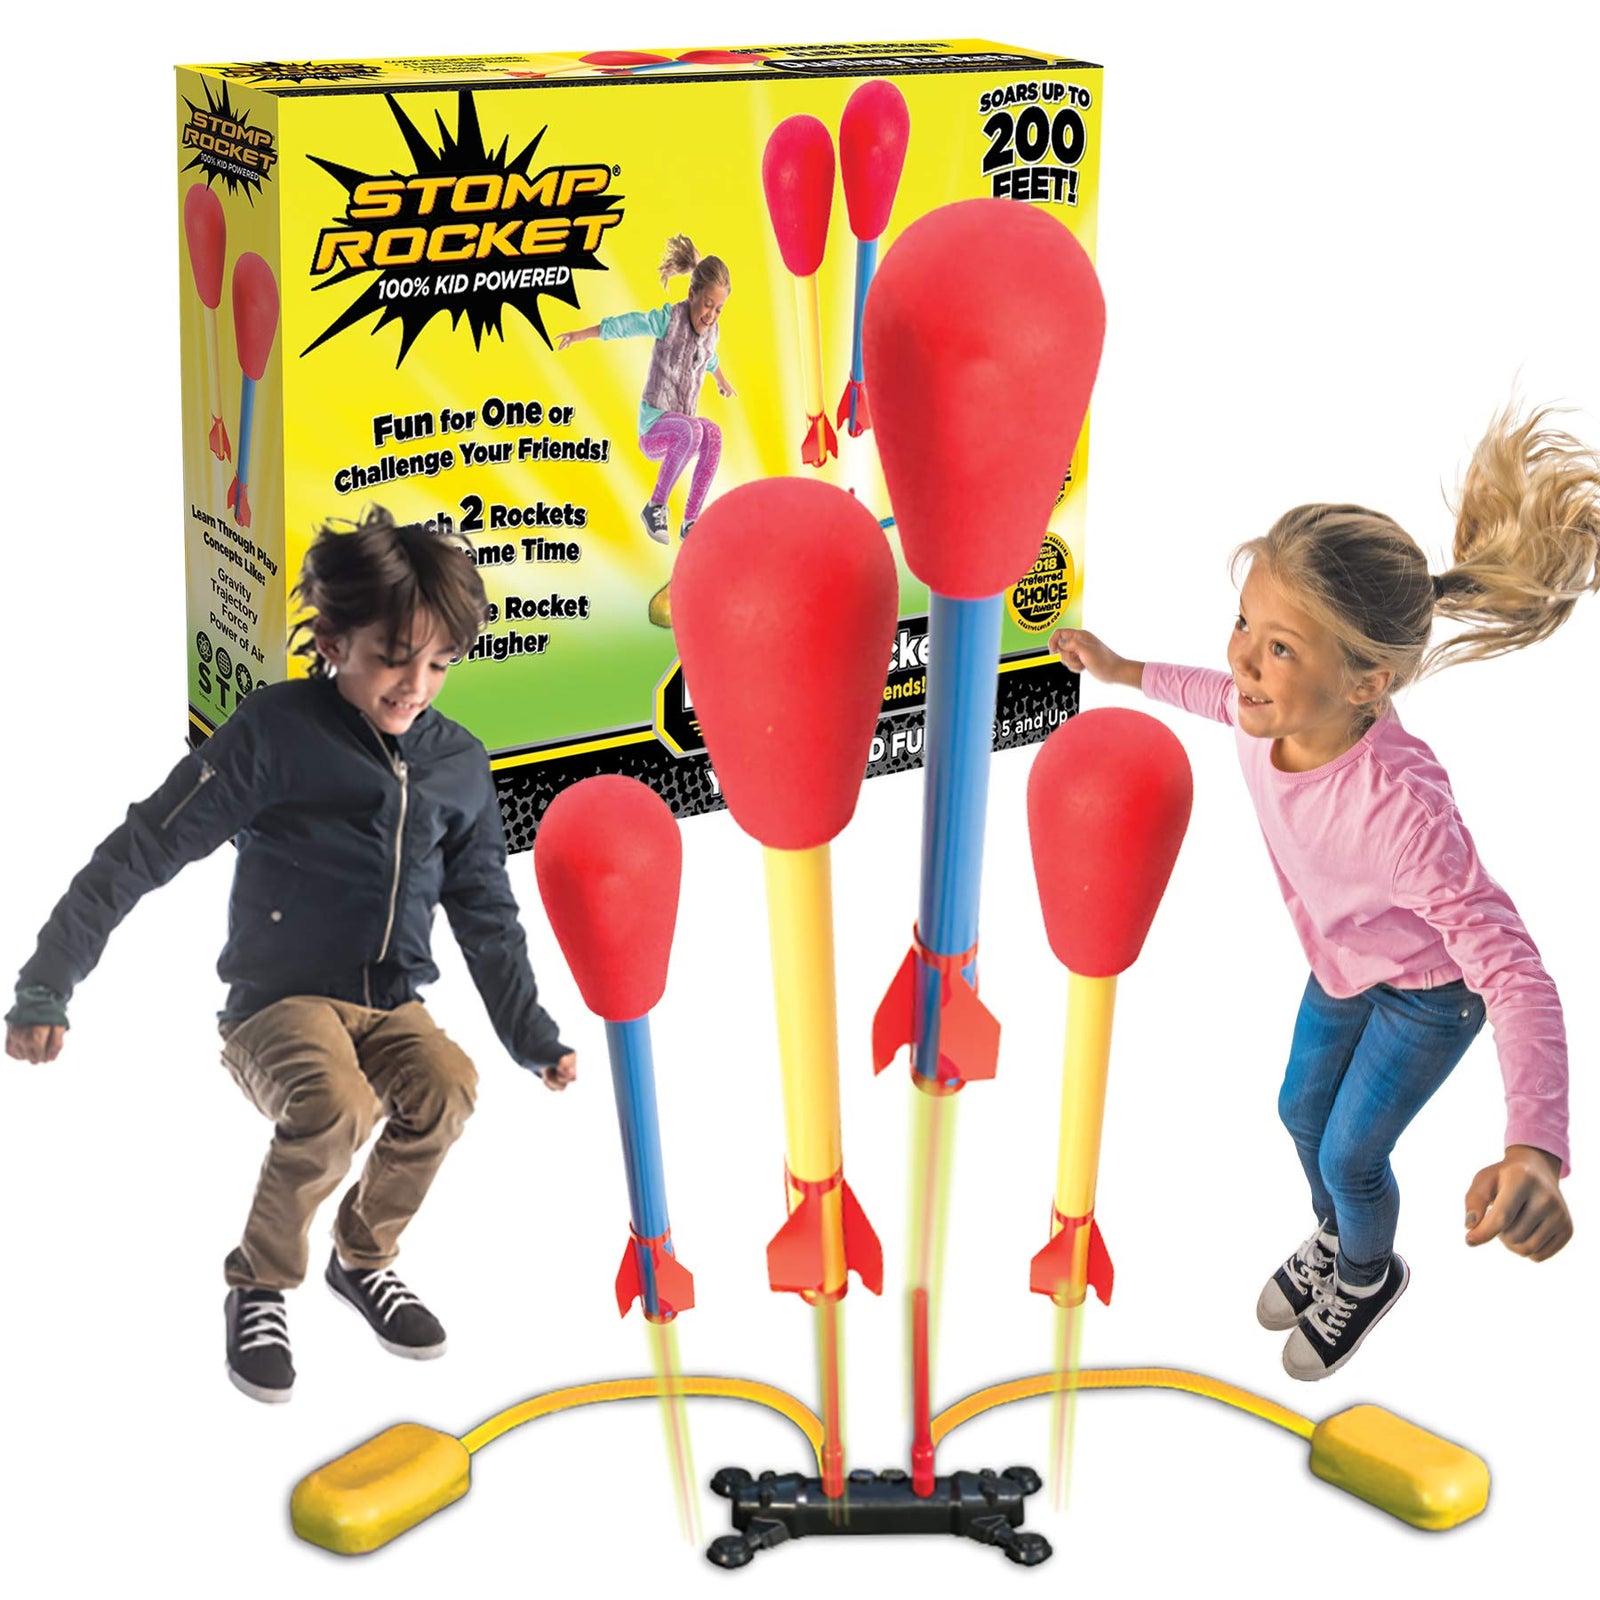 Stomp Rocket The Original Dueling Rockets Launcher, 4 Rockets and Toy Rocket Launcher - Outdoor Rocket STEM Gift for Boys and Girls Ages 5 Years and Up - Great for Year Round Play